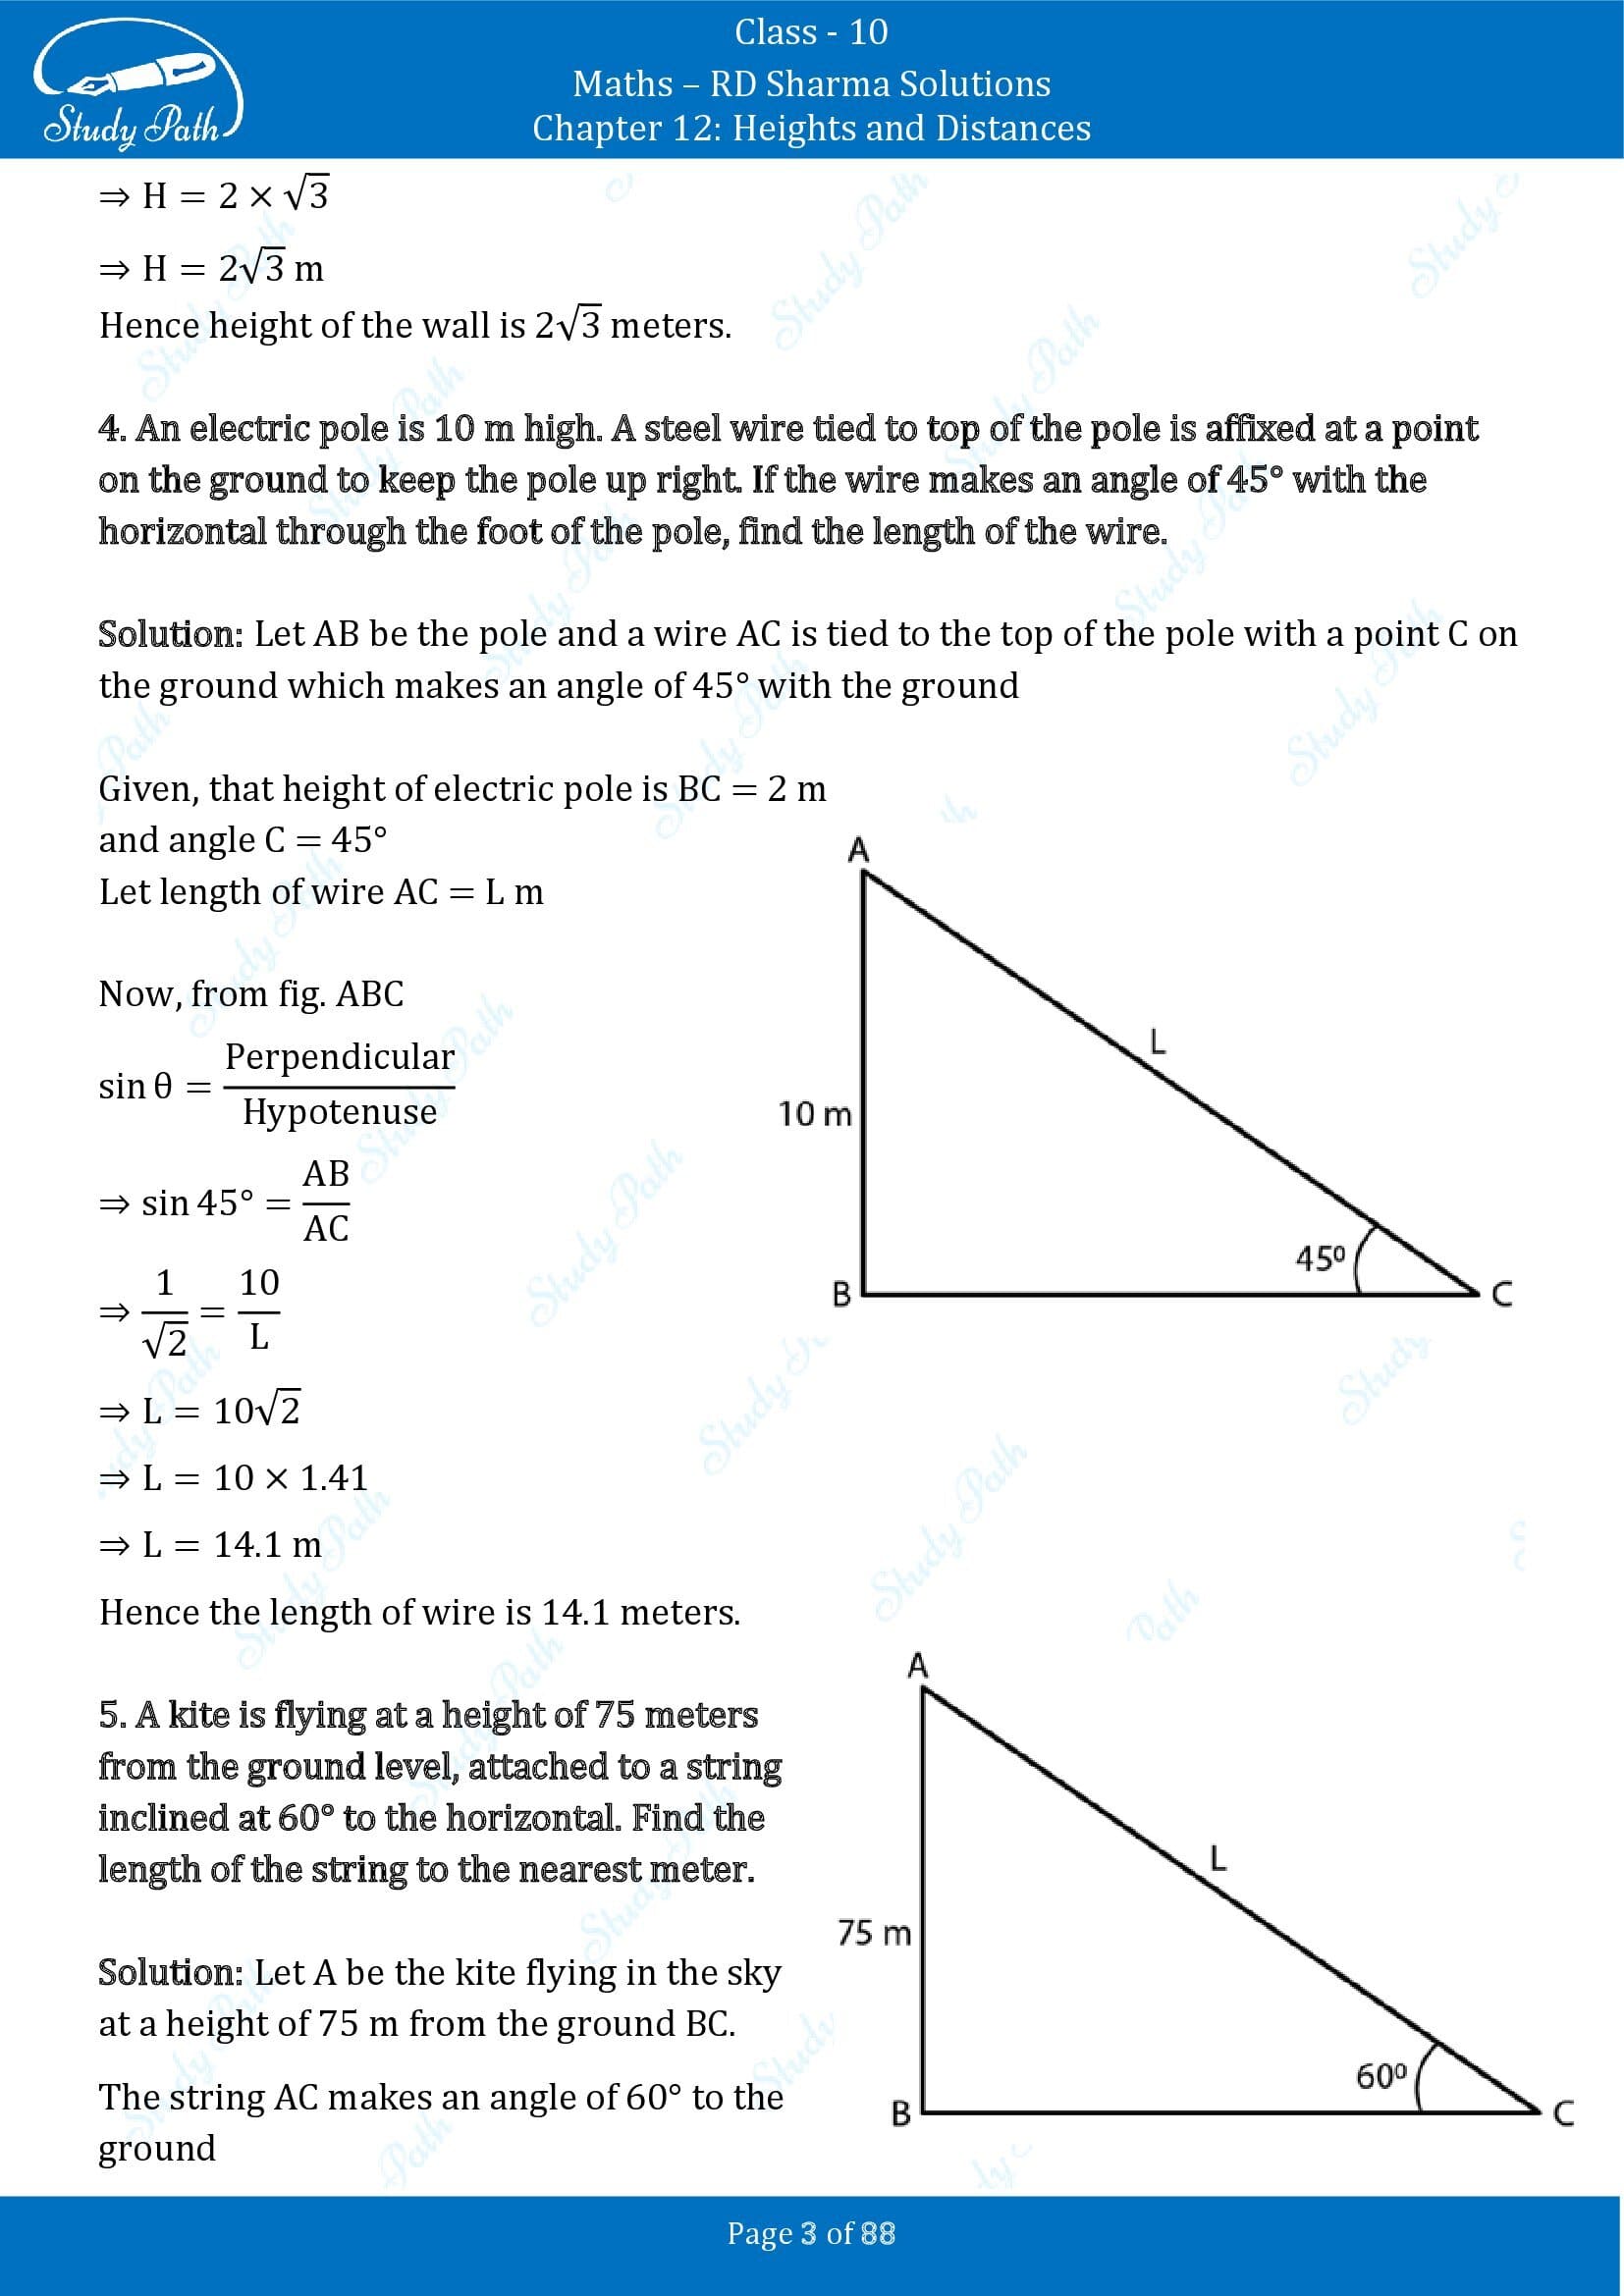 RD Sharma Solutions Class 10 Chapter 12 Heights and Distances Exercise 12.1 00003